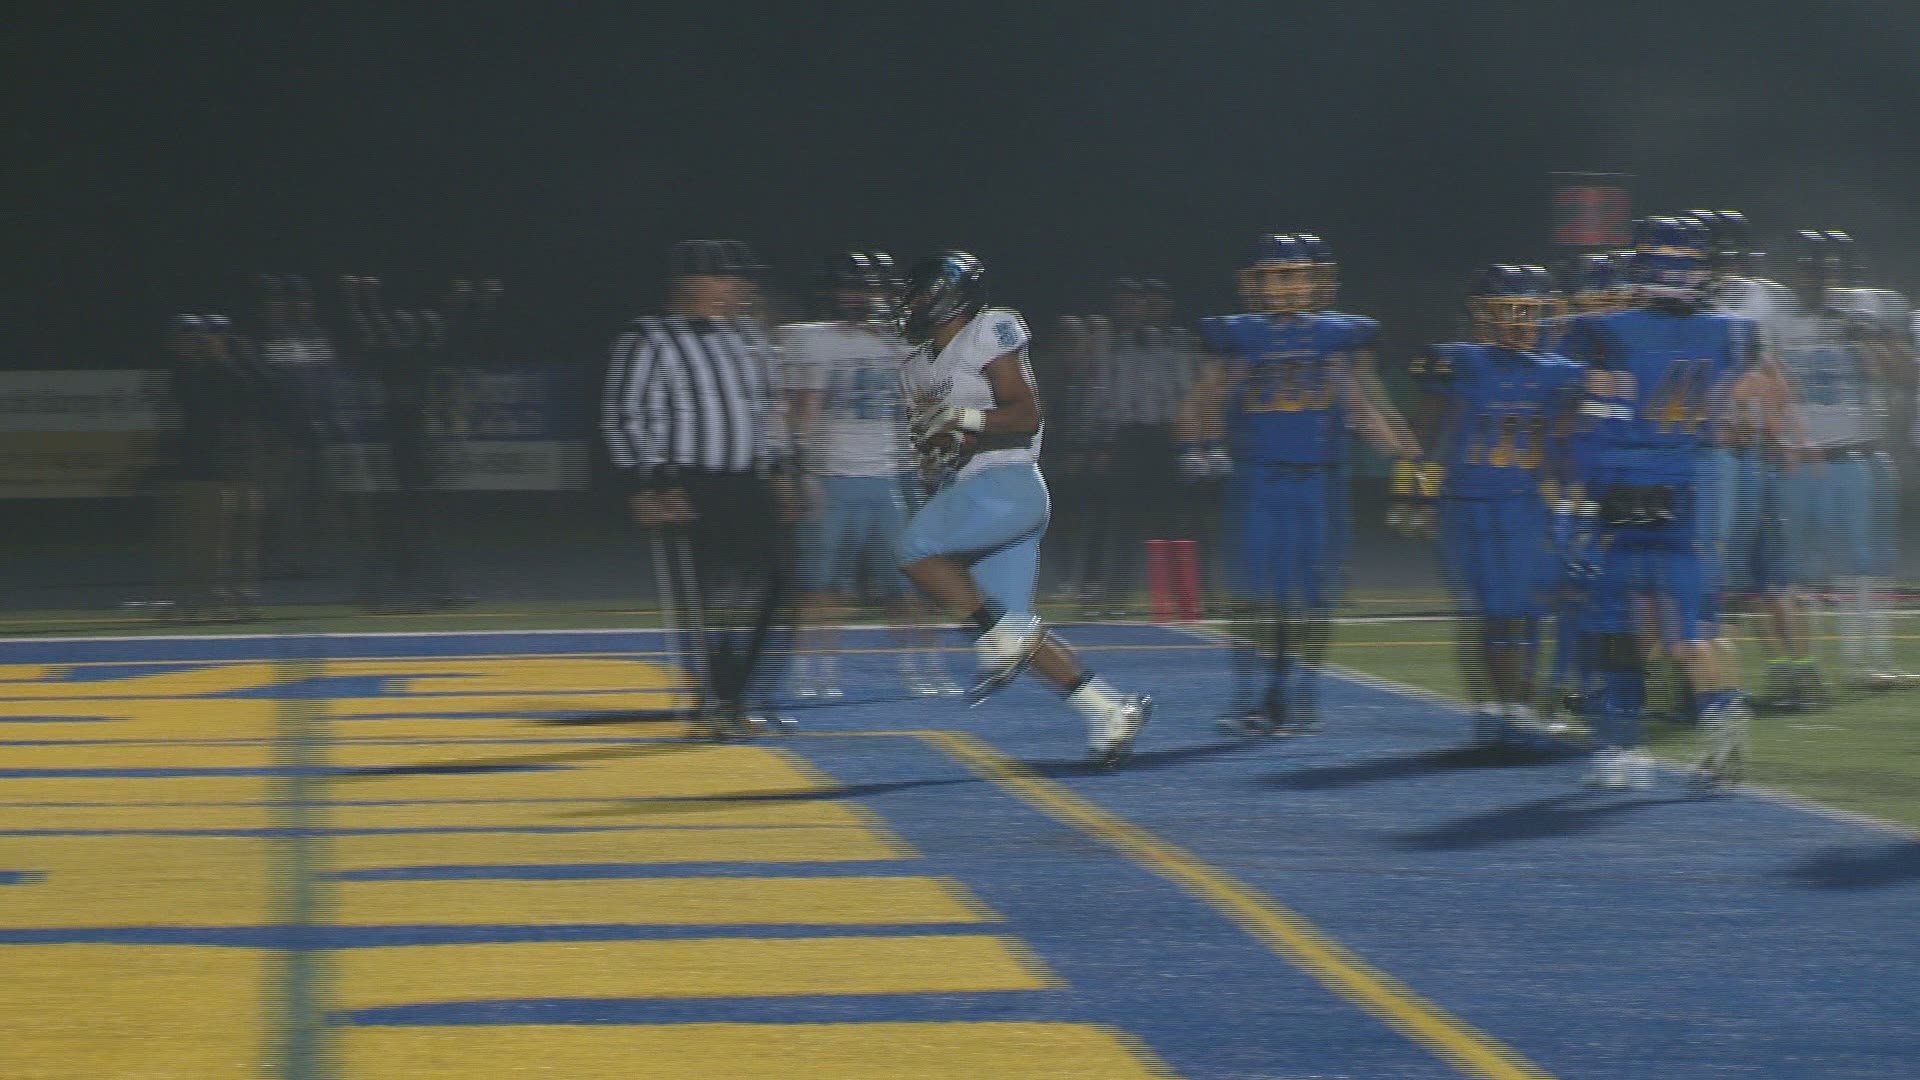 Highlights of Lakeridge's 51-40 win over Aloha in the second round of the playoffs. Highlights are part of Friday Night Flights with Orlando Sanchez.